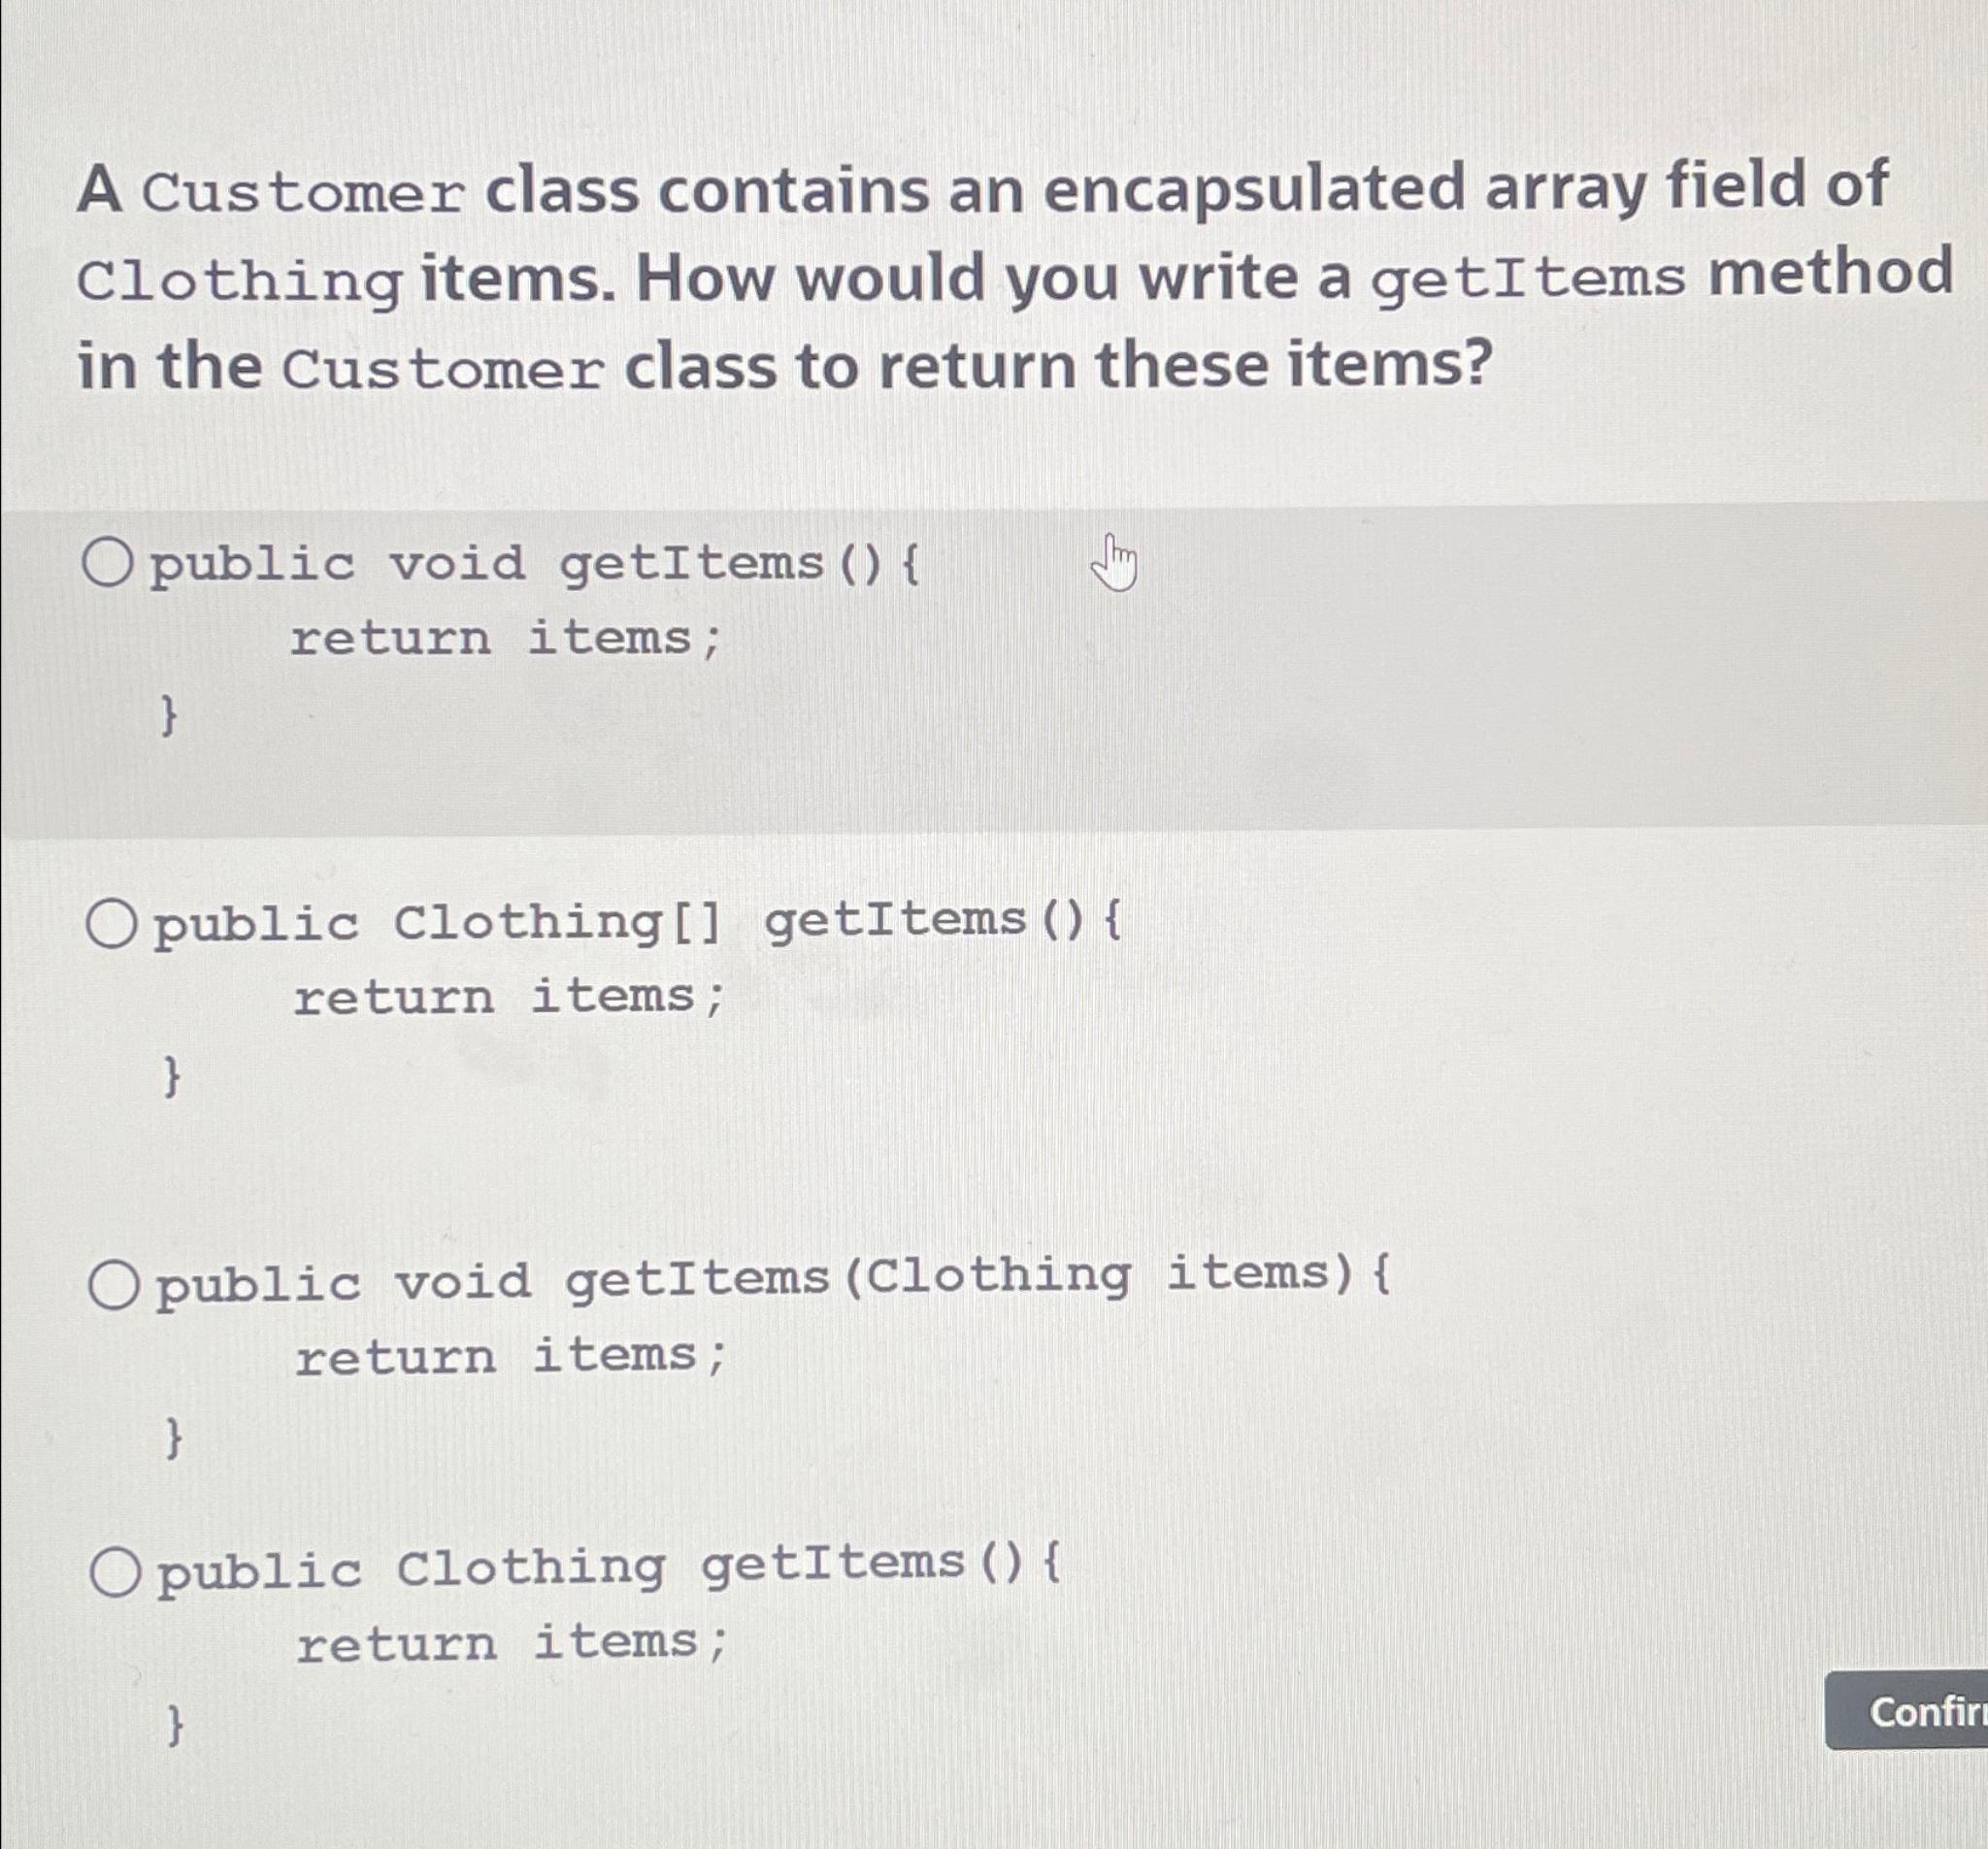 A Customer class contains an encapsulated array field of Clothing items. How would you write a getItems